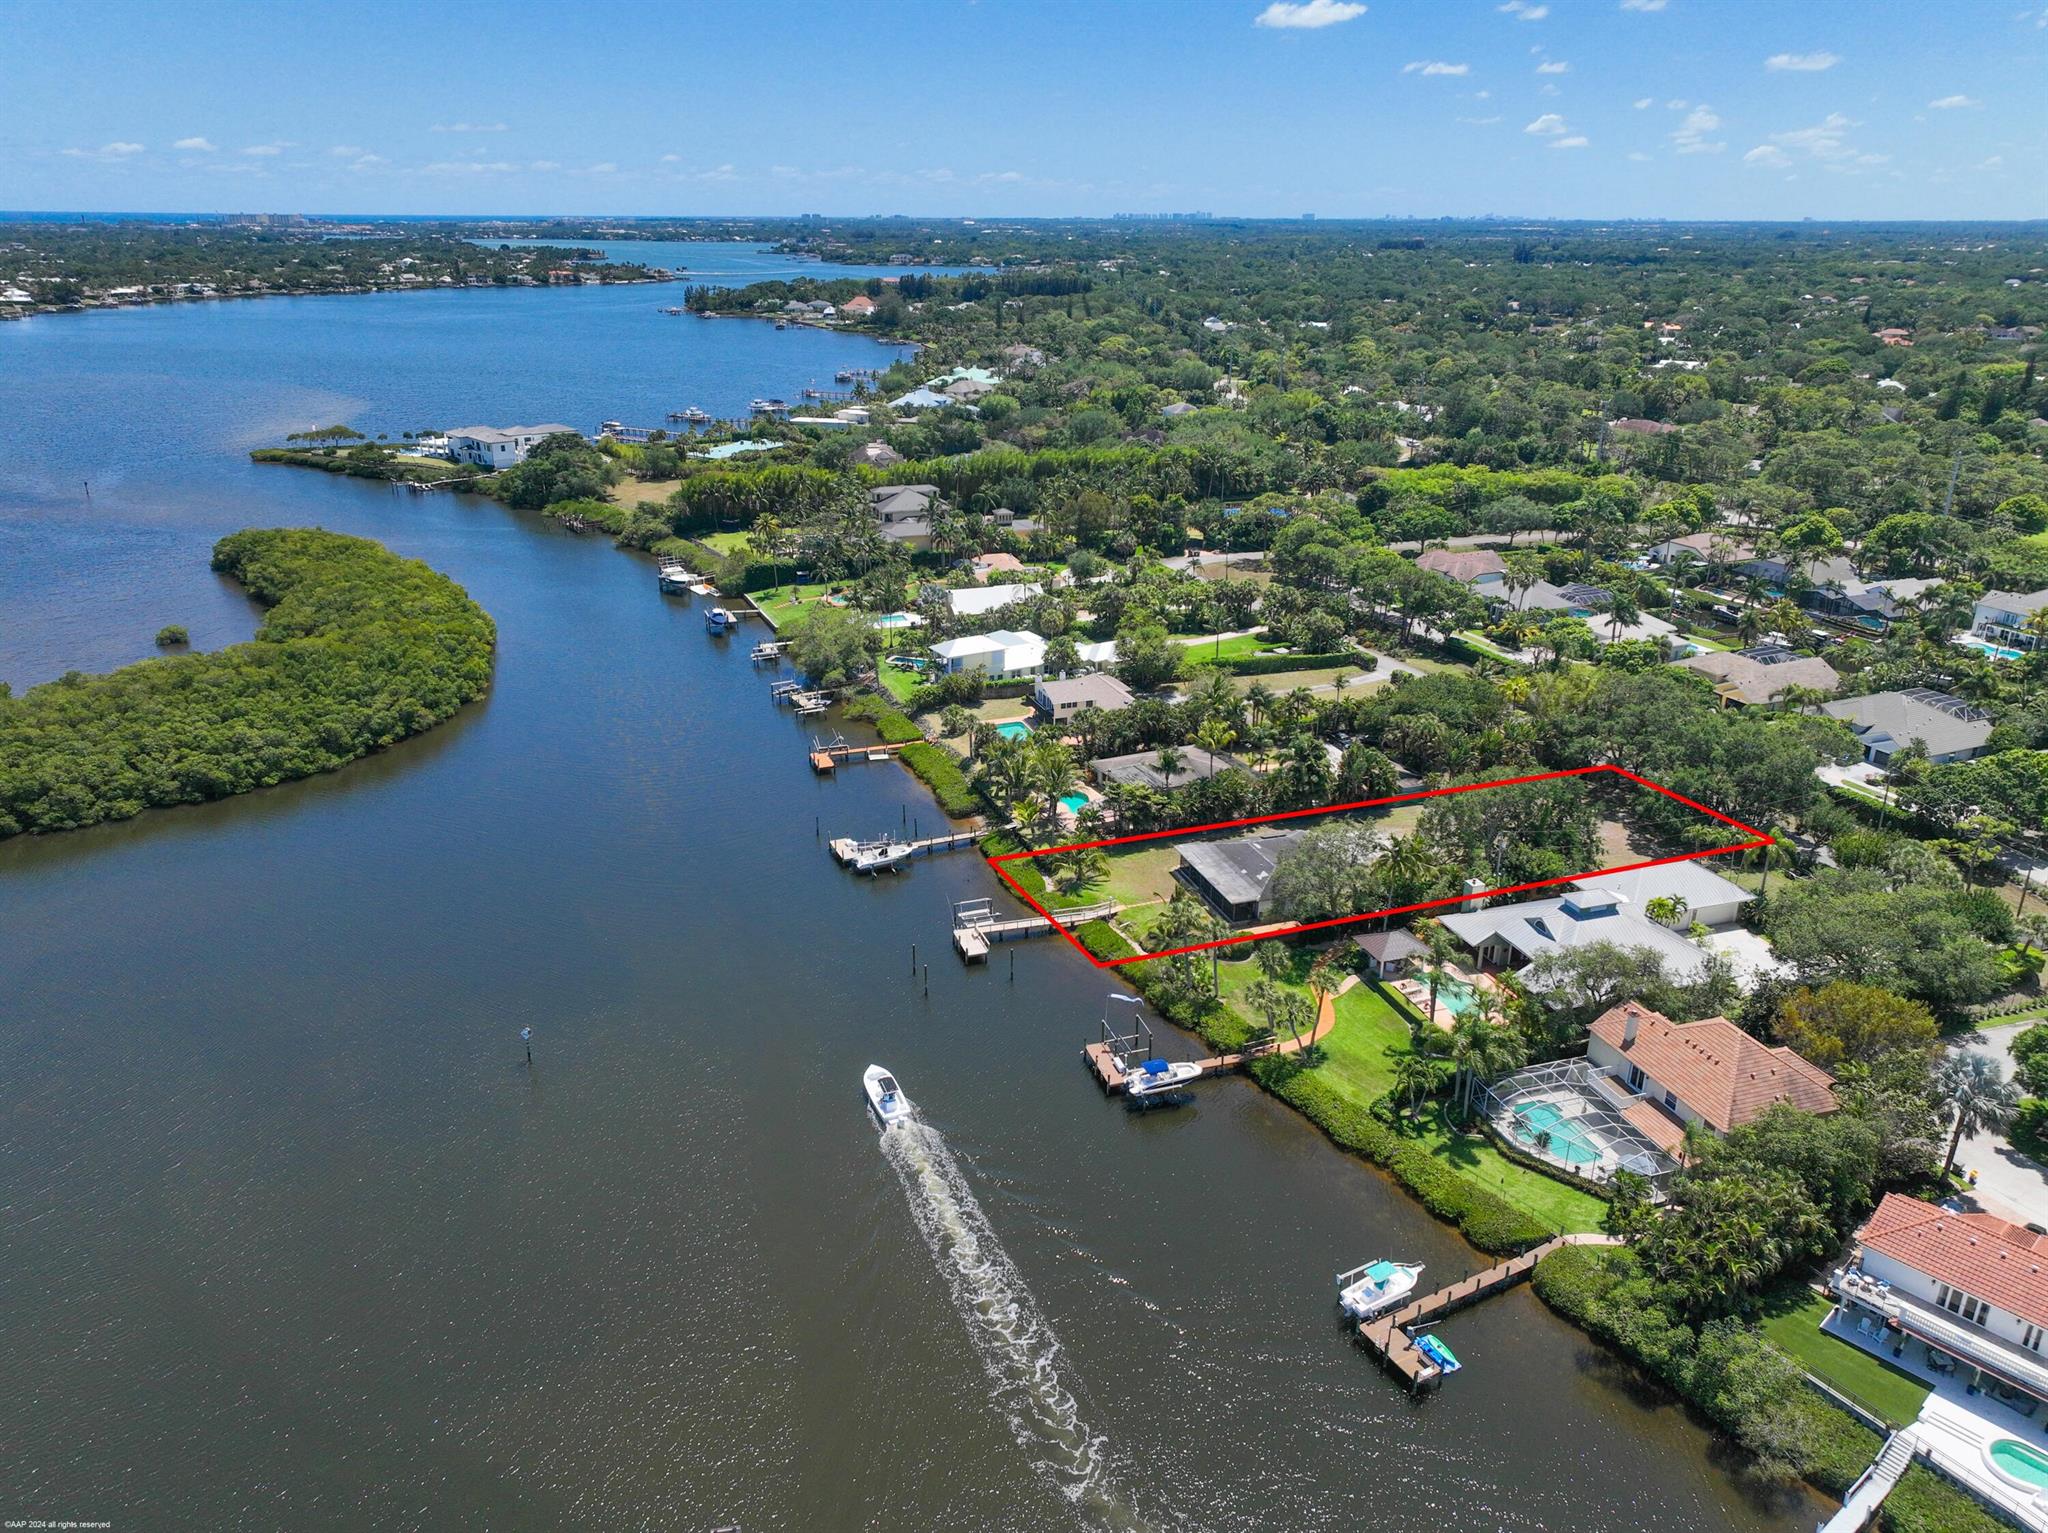 Exceptional opportunity to build a custom home on just under .7 of an acre with 100 ft on the Loxahatchee River. Beautiful water views with a dock on a quiet , peaceful street with only 7 riverfront homes. No HOA, low unincorporated only taxes, and the ability to build any style of house that you prefer. Live in the highly desirable town of Jupiter and build your waterfront  dream home. Just a short boat ride to the Jupiter Inlet & sand bars and quick  access to I-95 and the turnpike.